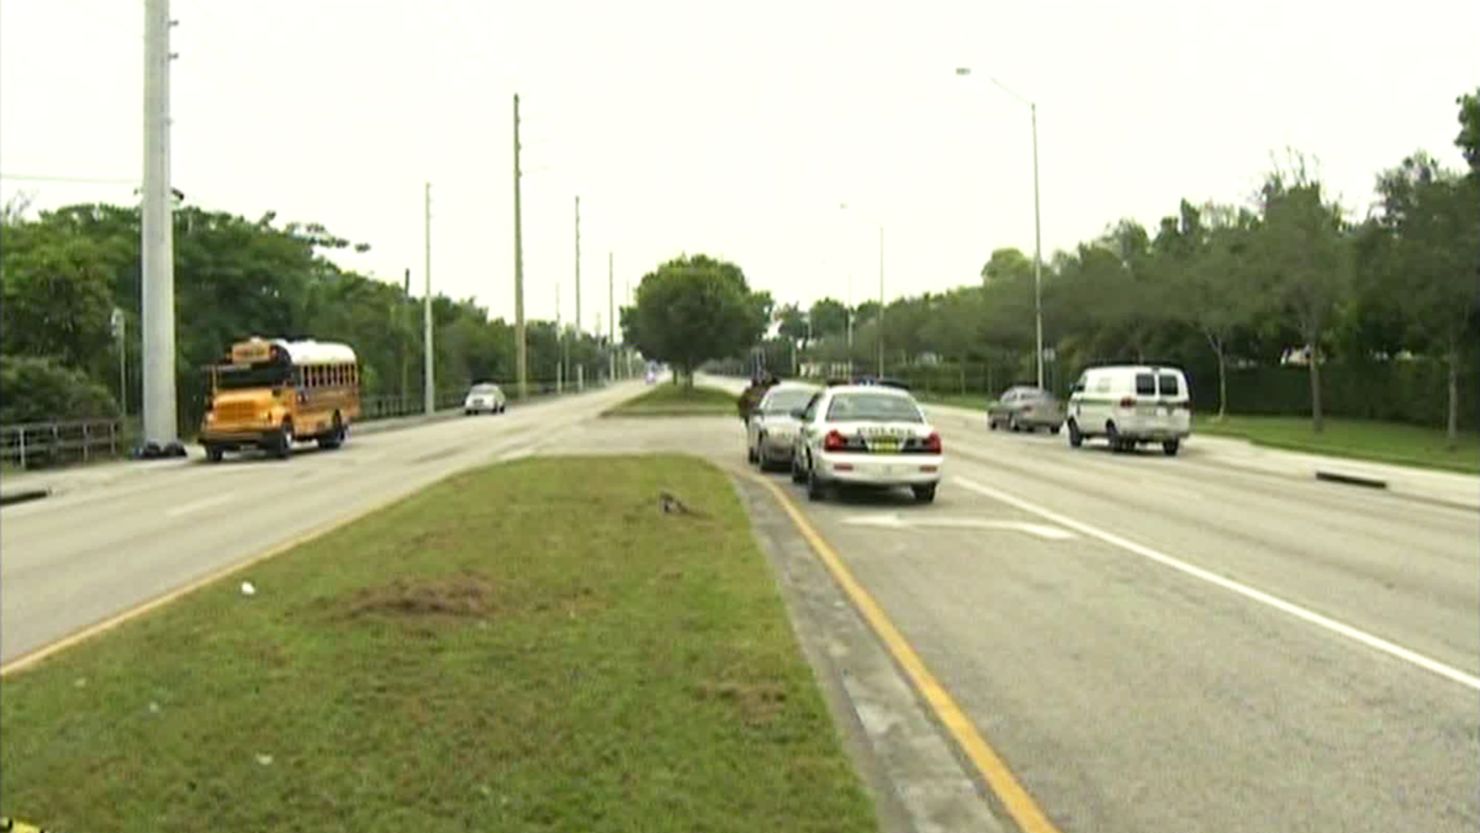 A 13-year-old girl was shot to death Tuesday morning on a school bus in Homestead, Florida, police say.